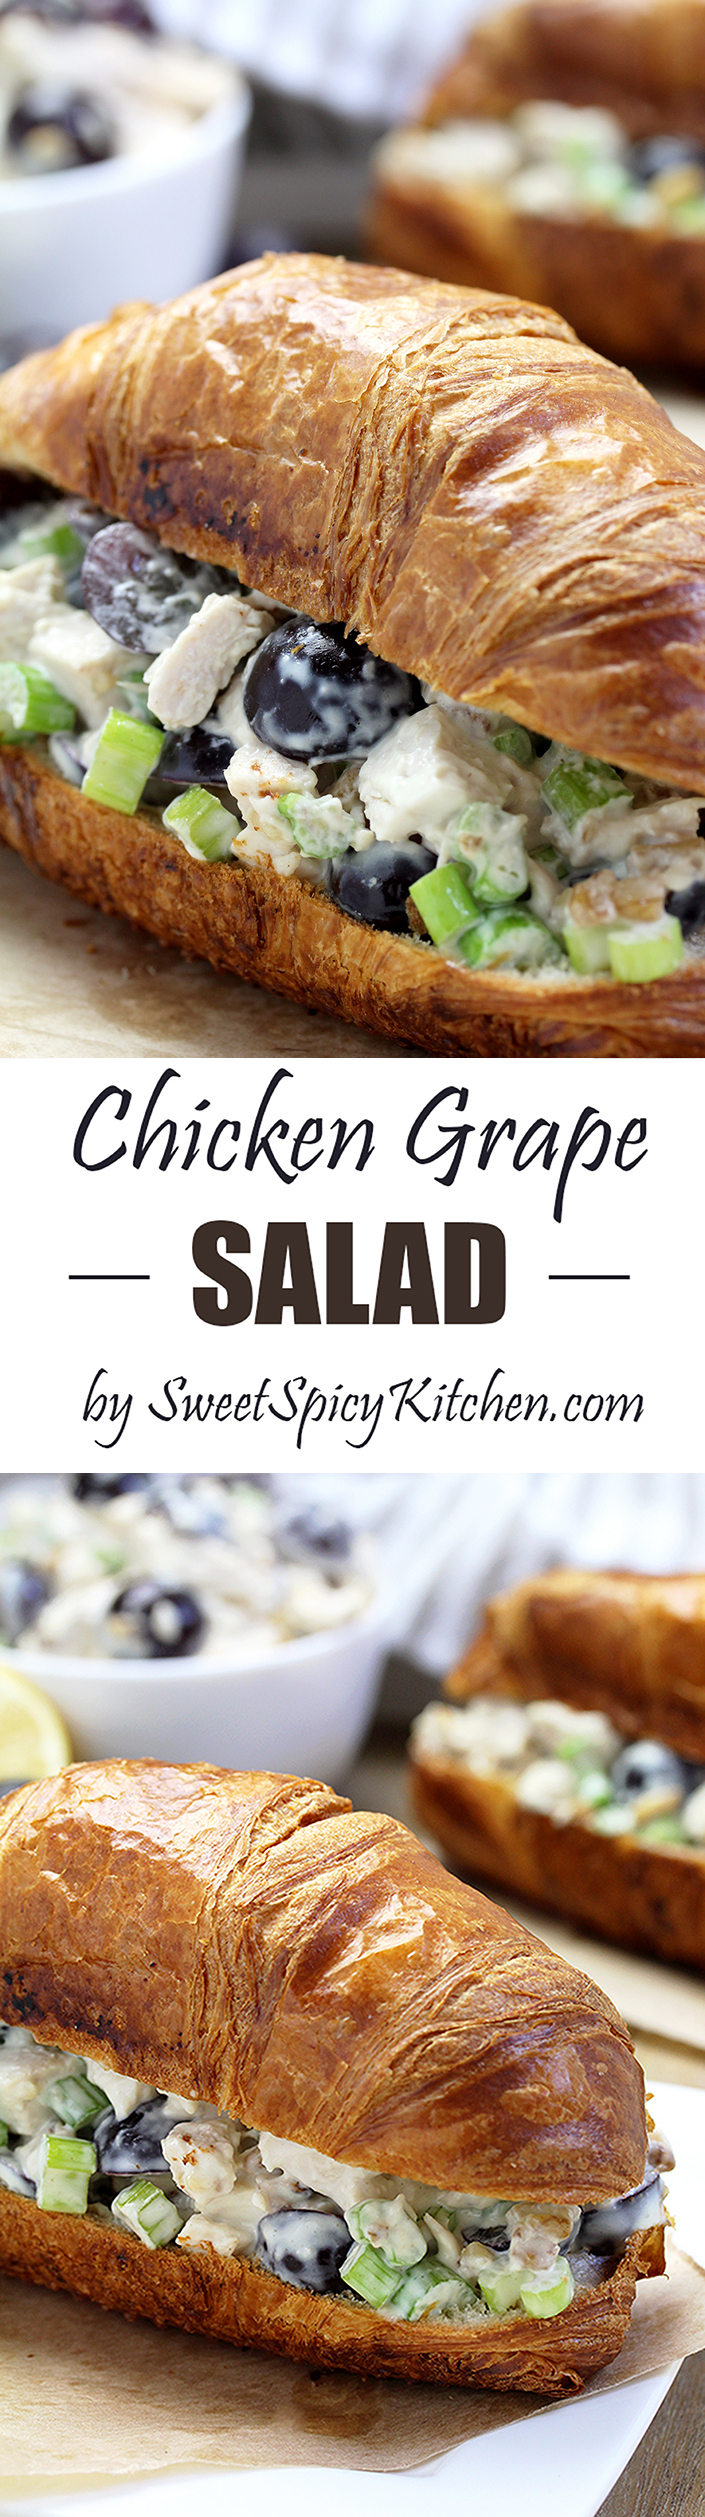 The Best Chicken Grape Salad is a delicious quick & easy salad with chicken, grapes, celery, walnuts/pecans and a dressing that makes it really special.